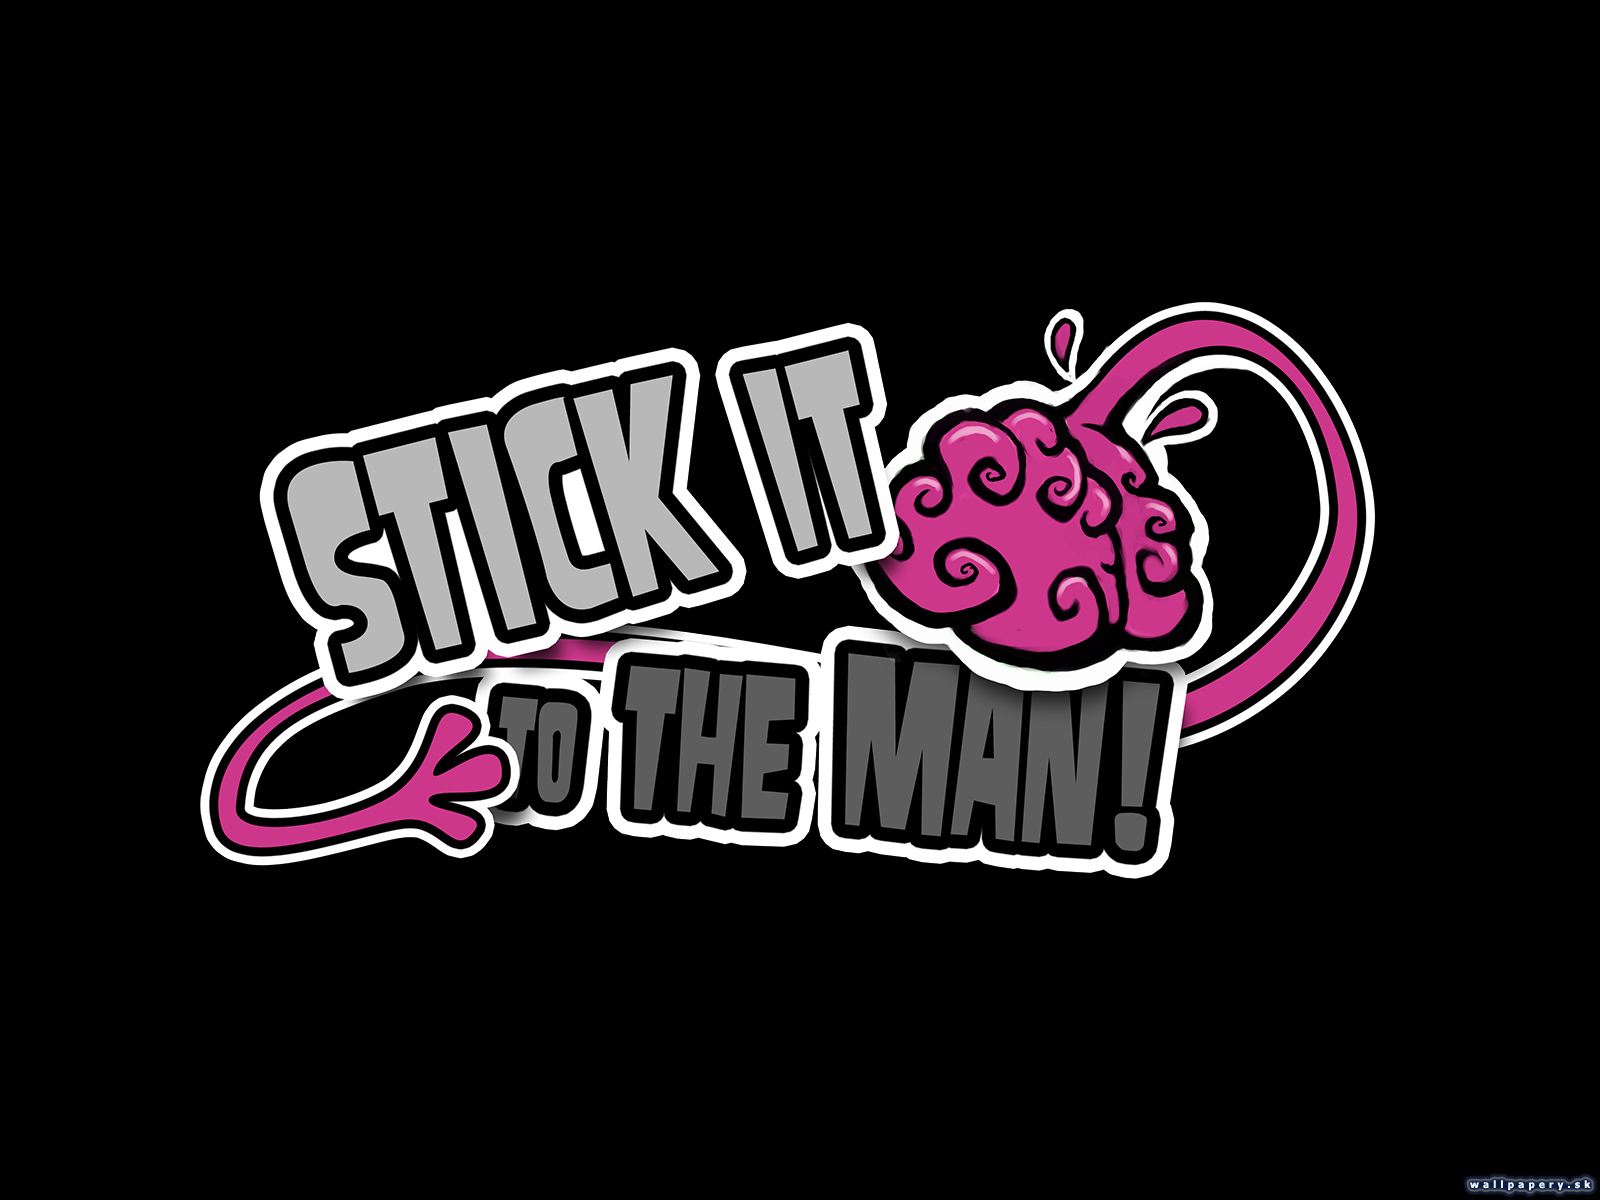 Stick It to The Man - wallpaper 2